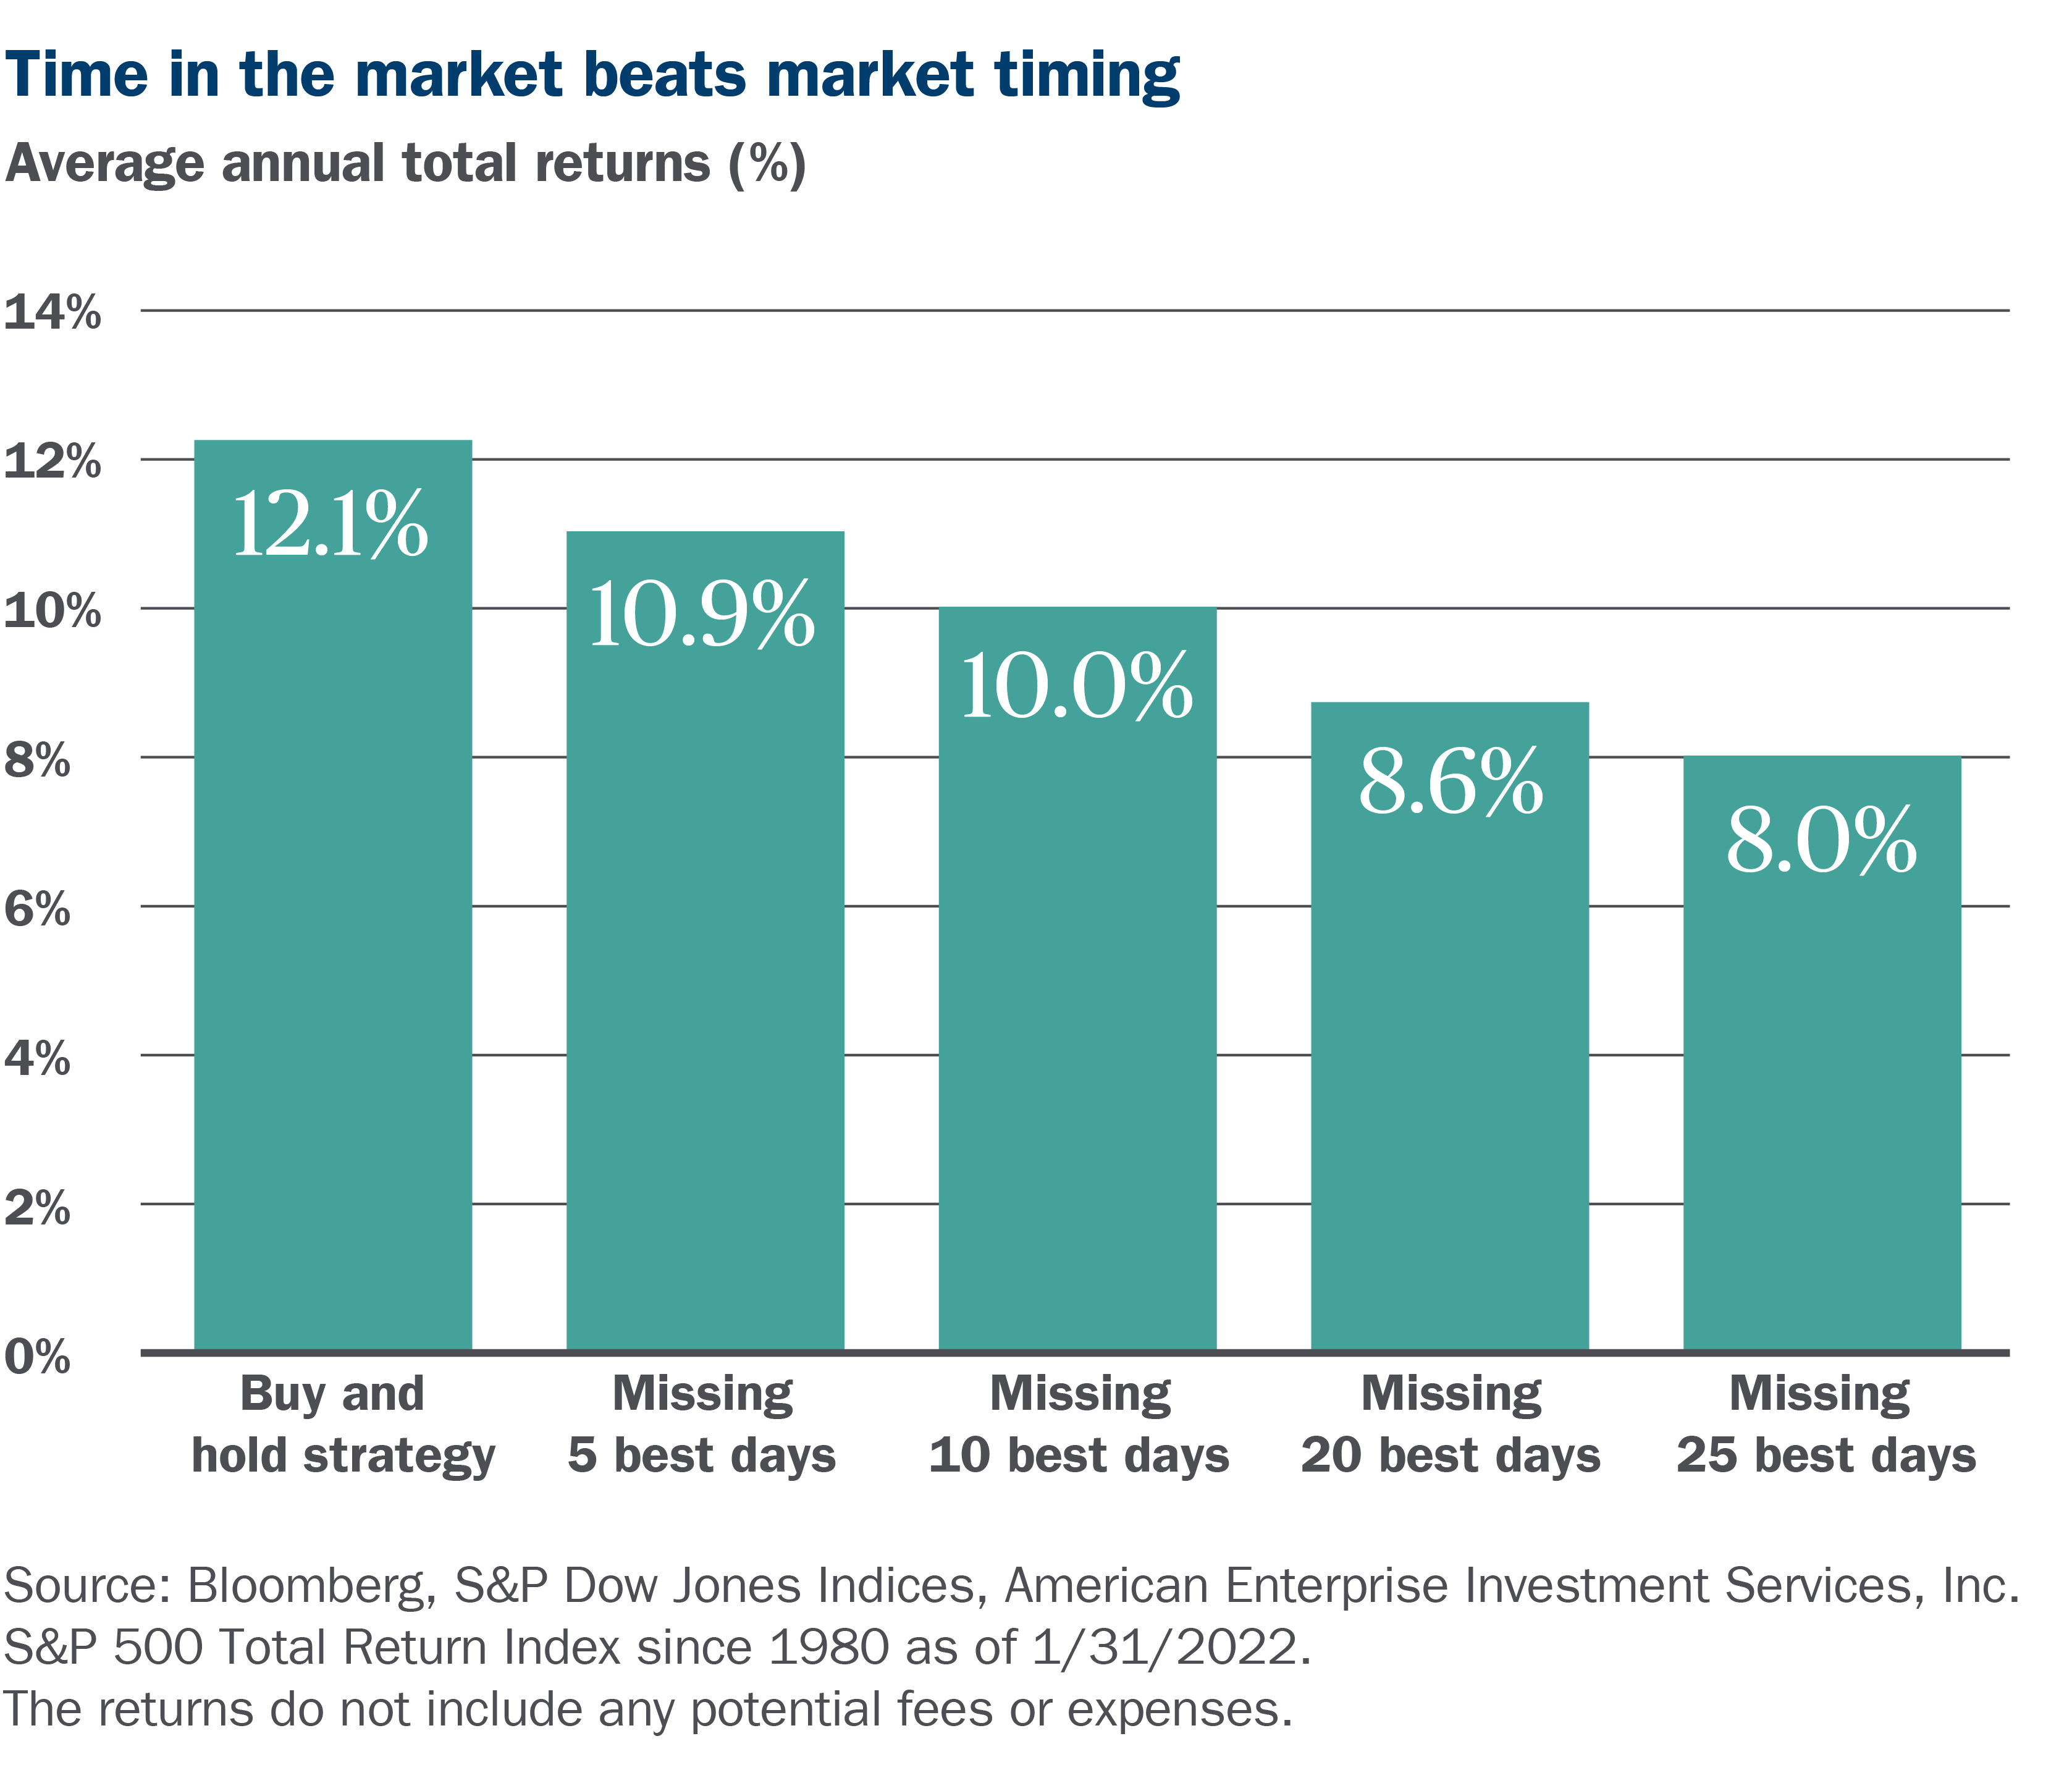 Bar chart showing the time in market outperforming trying to time the market